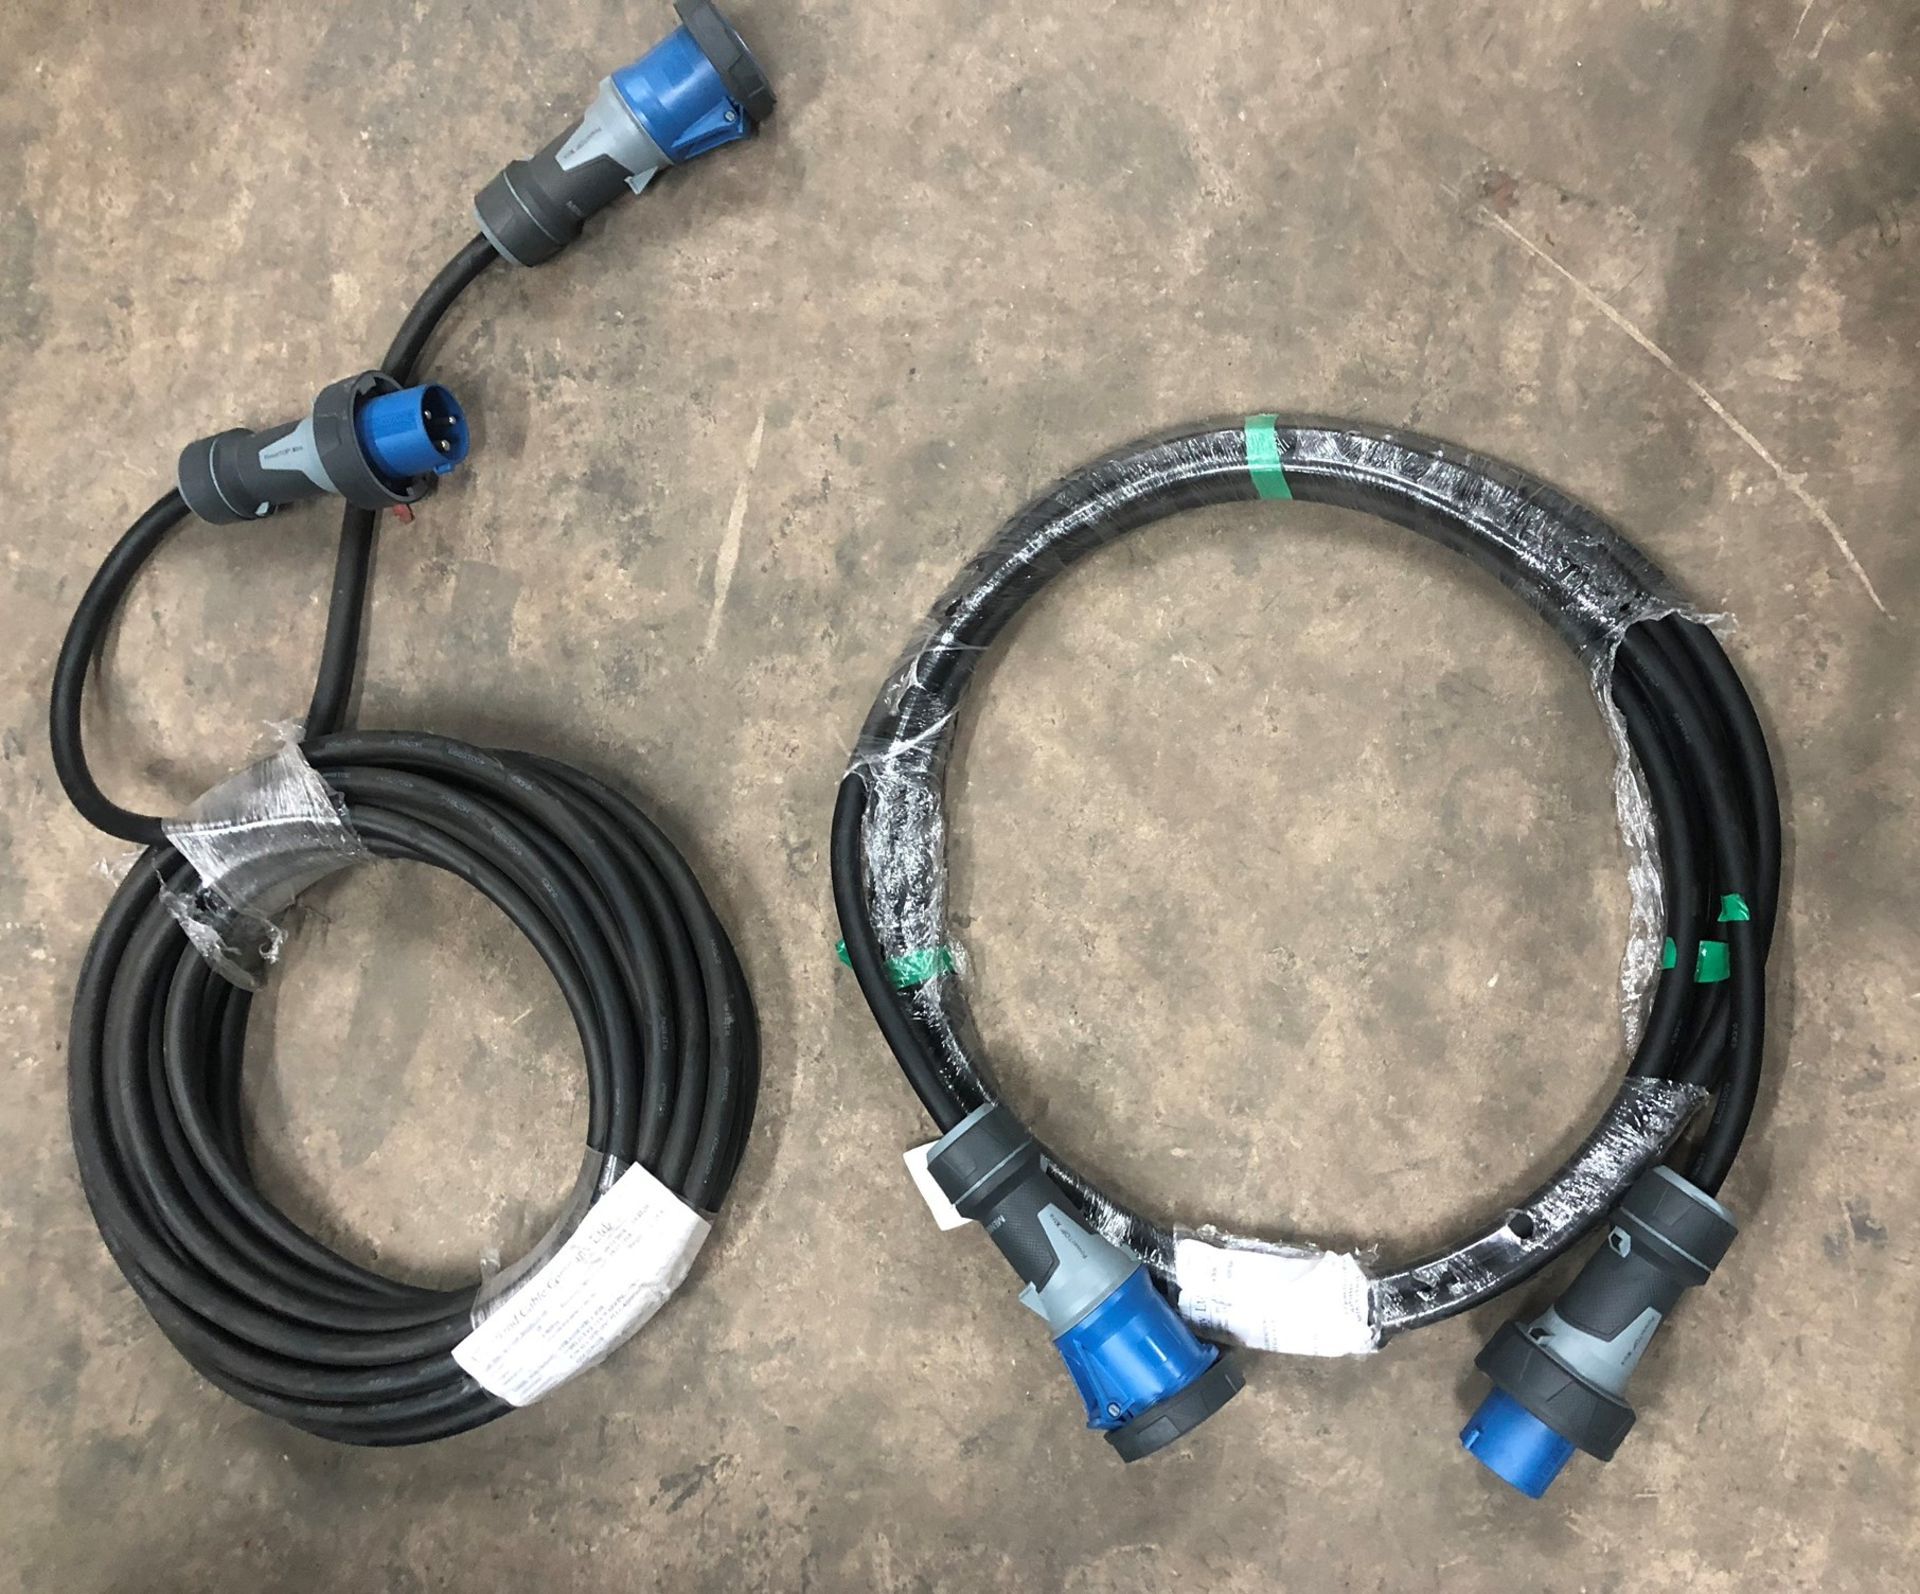 2 x Single Phase 3 Pin Extension Cables w/ Mennekes PowerTop Xtra Plug & Connector